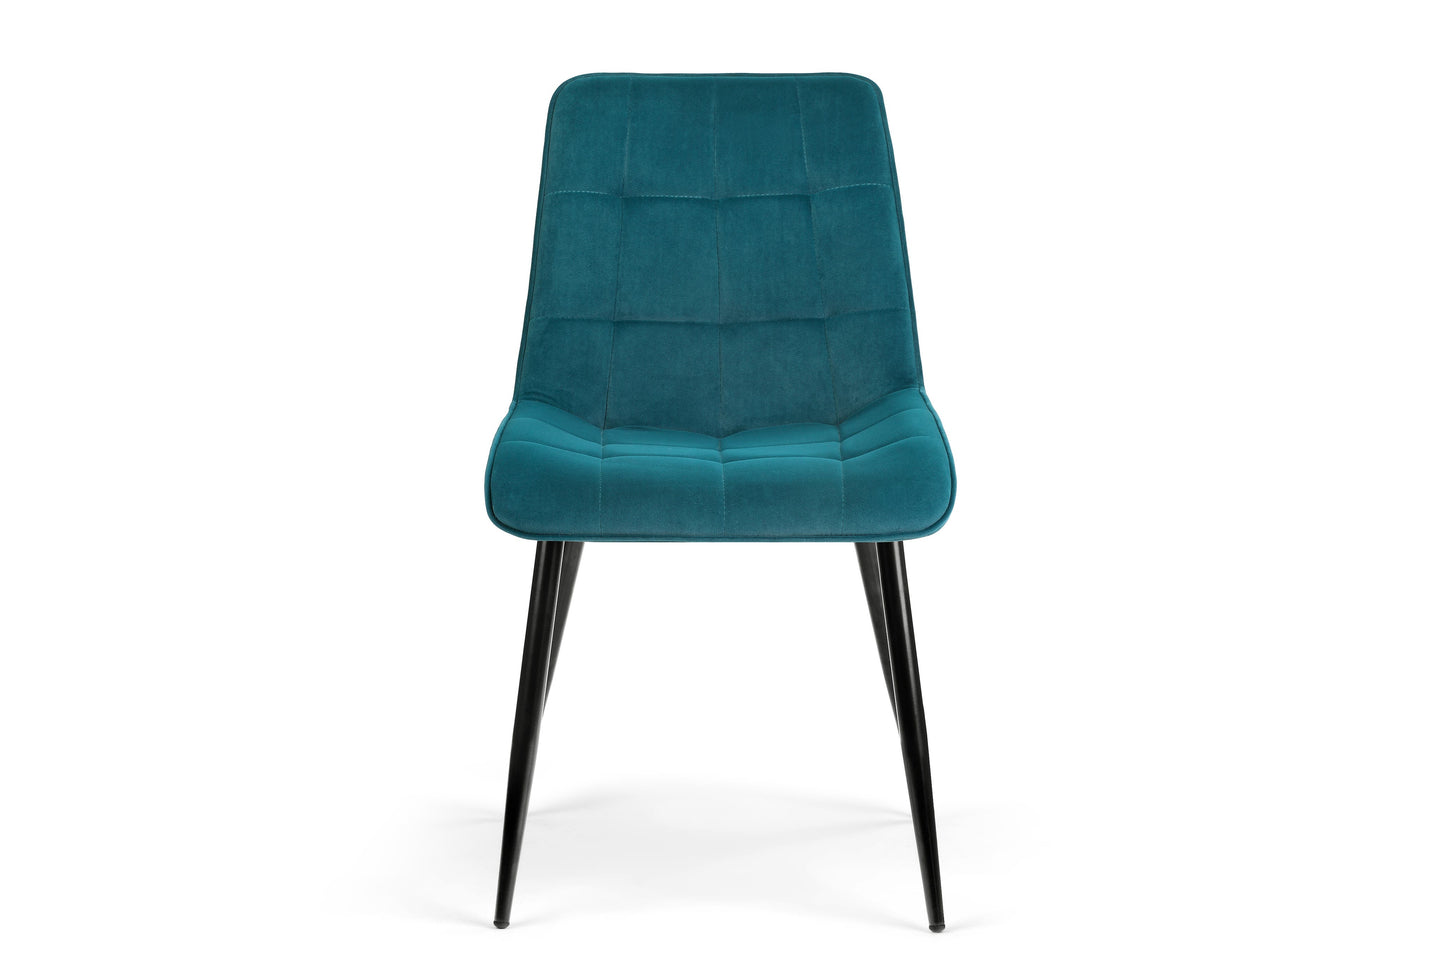 Shangri-La Set of 2 Dover Dining Chairs (Teal)